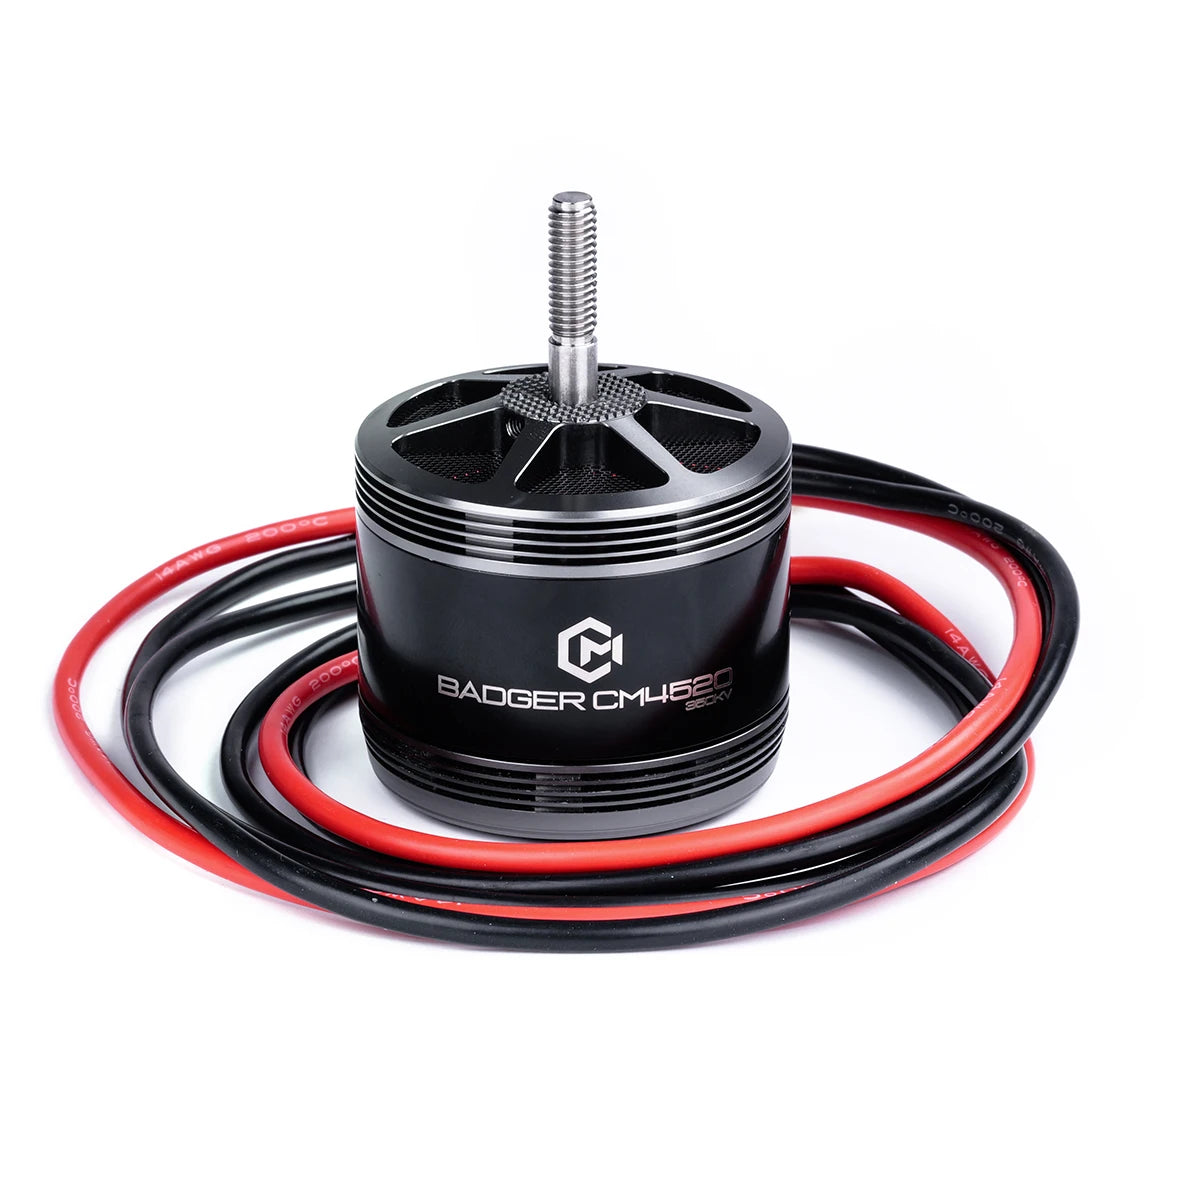 MAD CM 4520 BADGER FPV Drone Motor - 12S 350KV 10.9kgf Brushless for 13-15 inch Three-blade prop long range FPV RACING Cinelifter drone